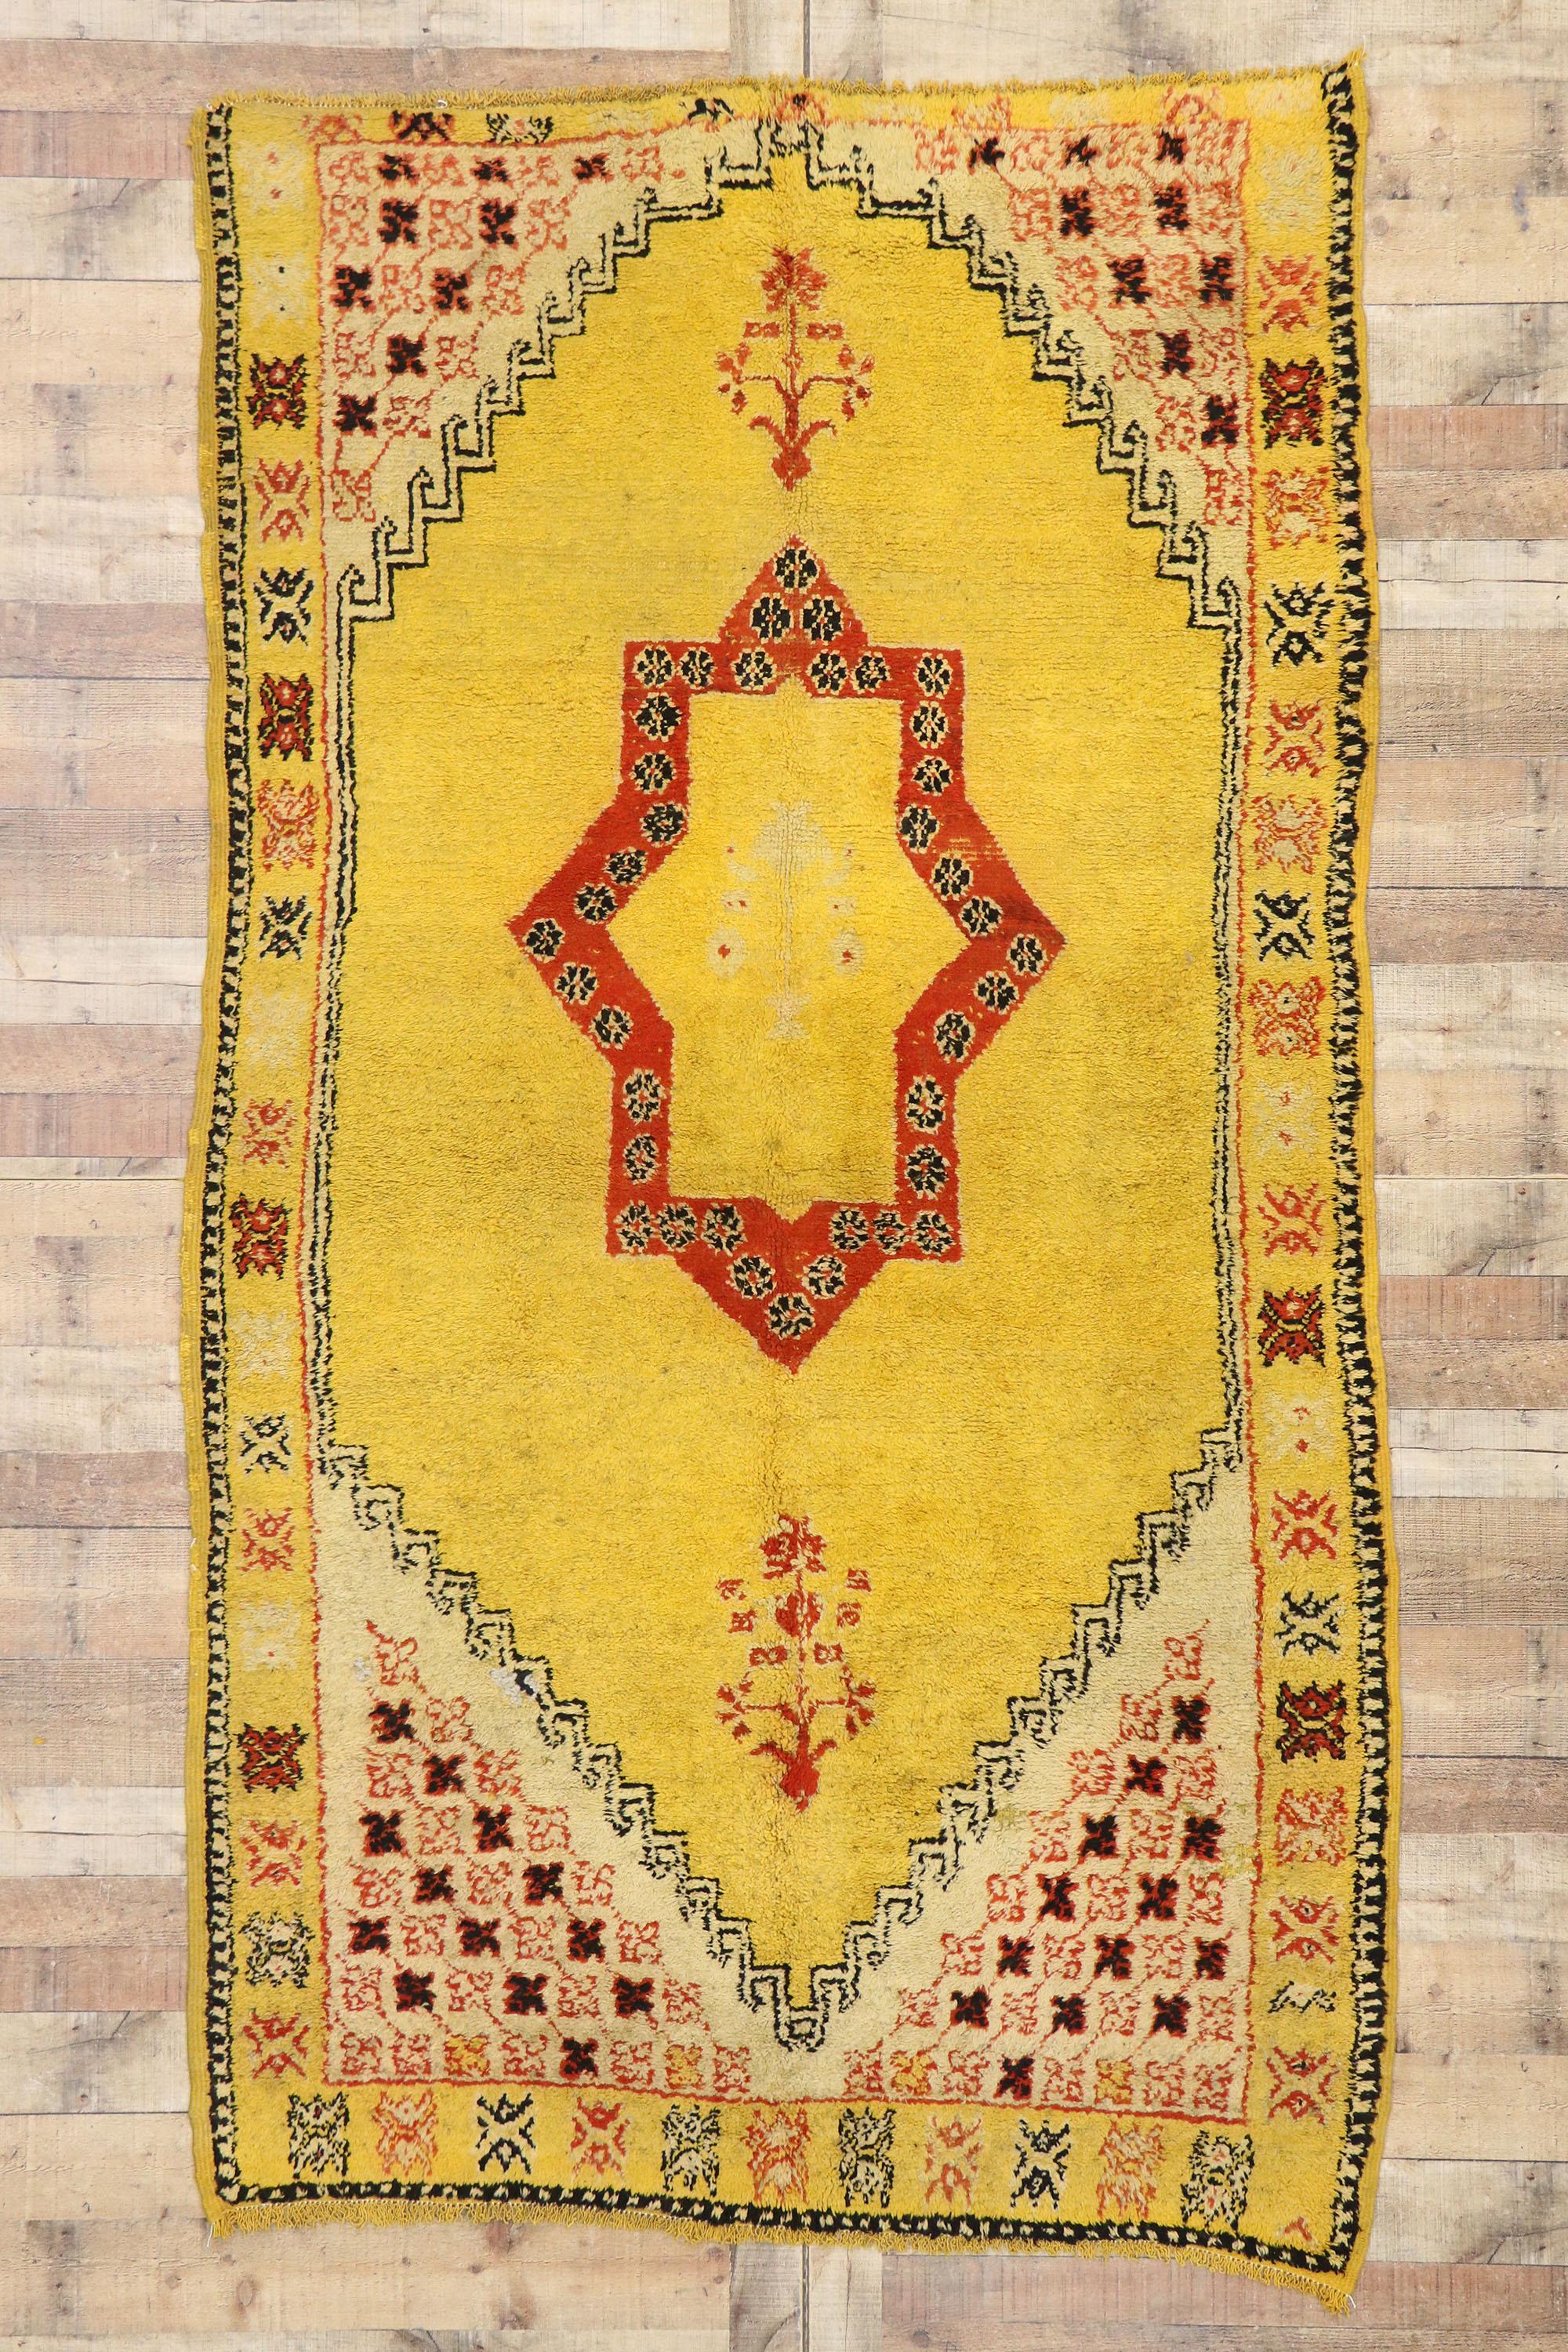 Vintage Berber Moroccan Rug with Bohemian Style 2